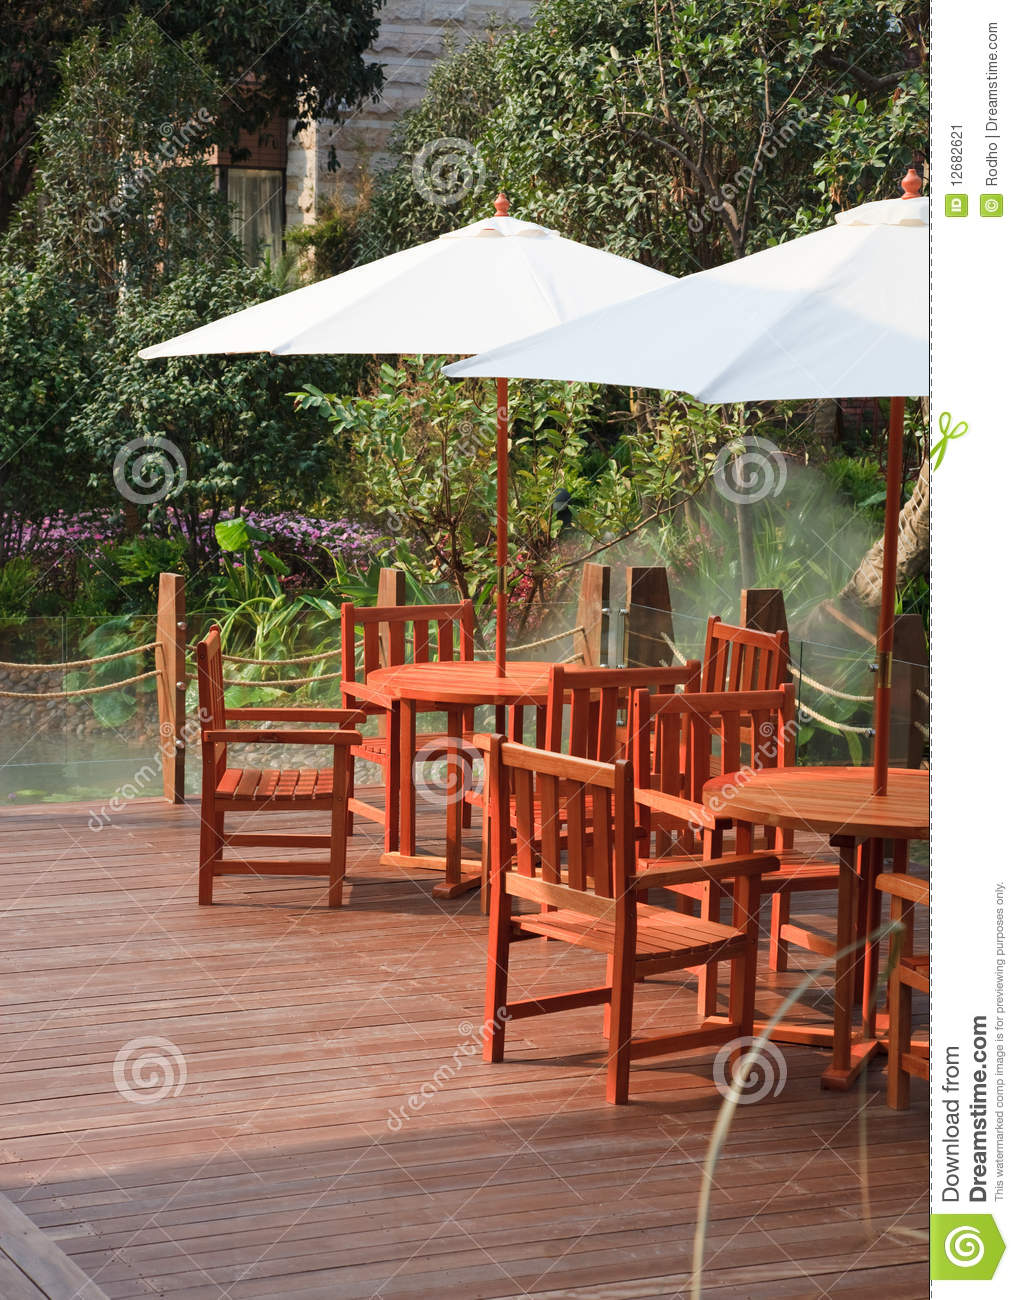 House Patio With Table And Chairs Stock Image   Image  12682621